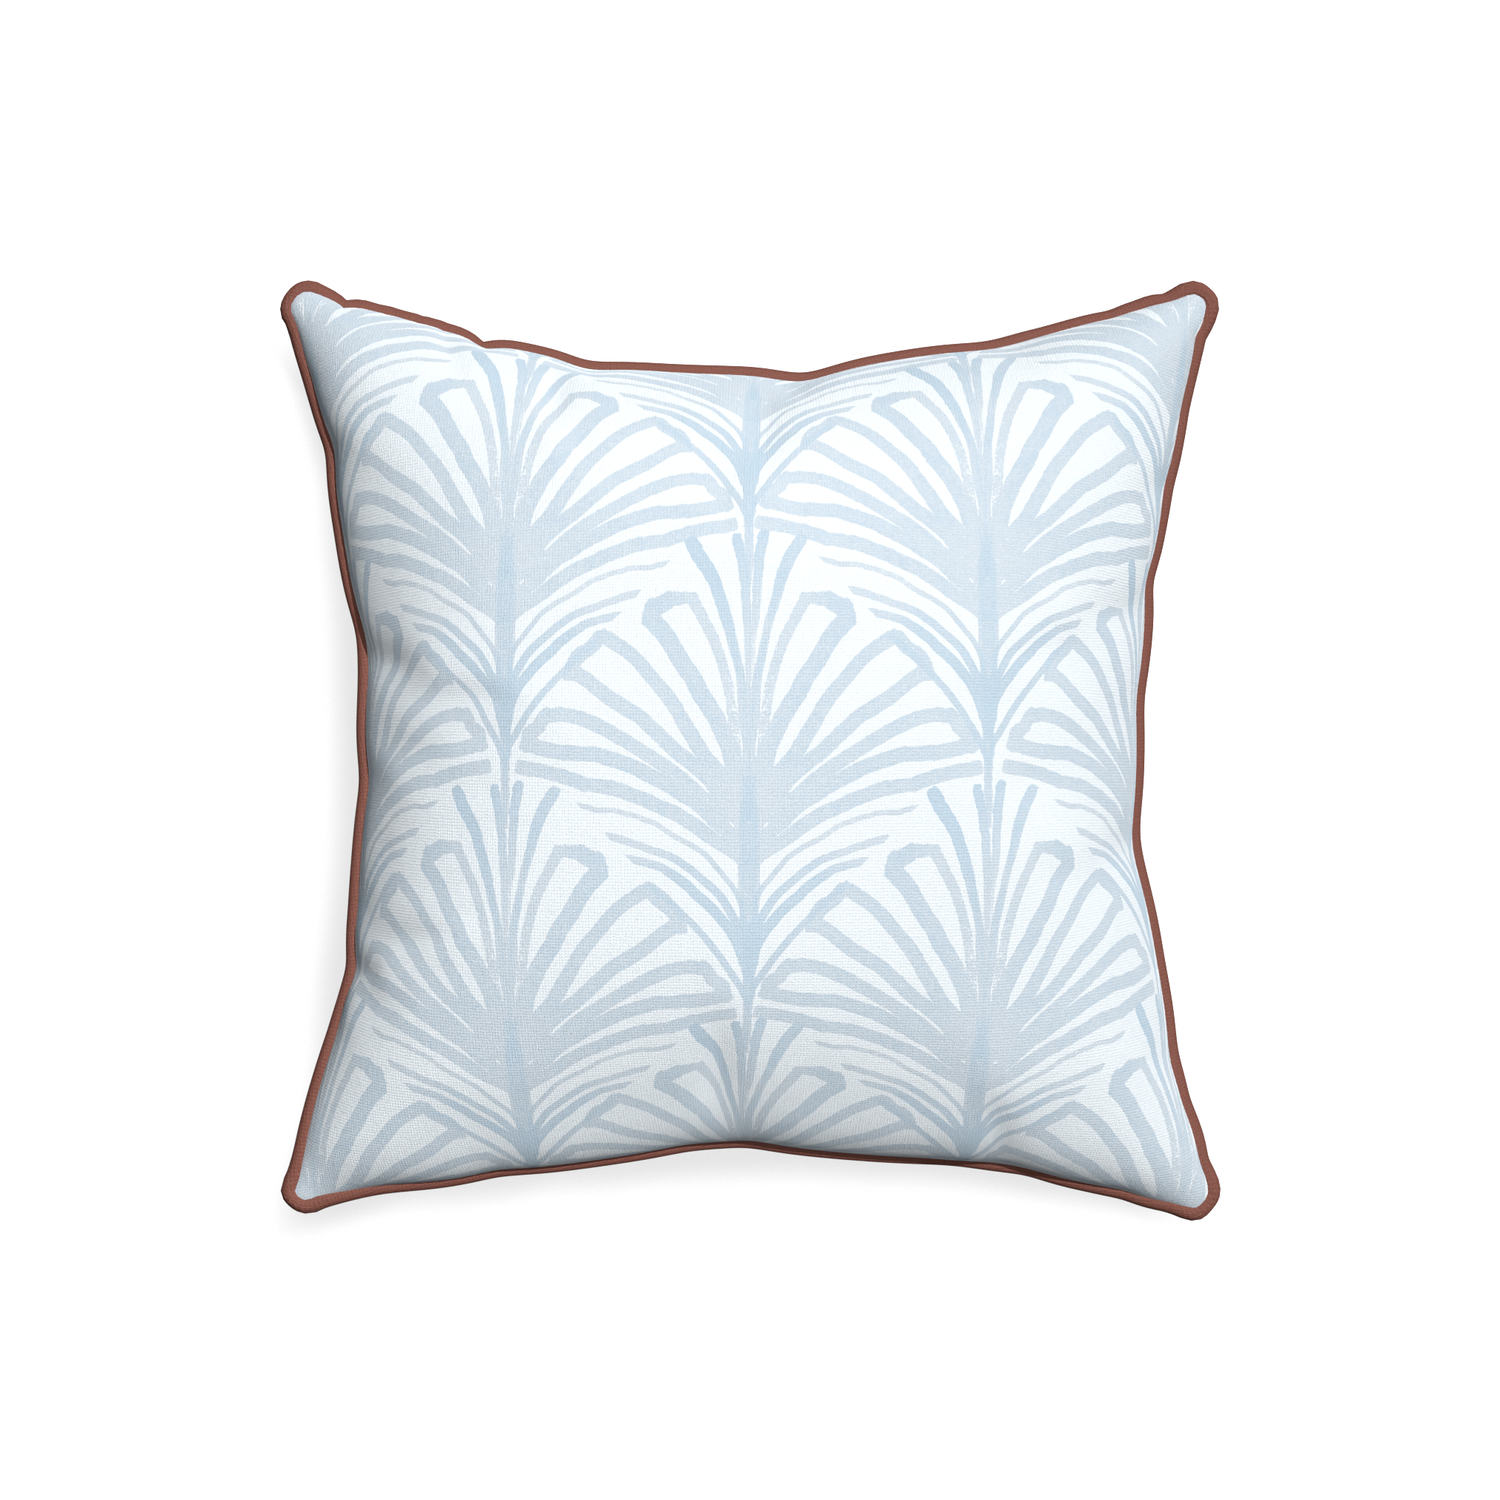 20-square suzy sky custom pillow with w piping on white background